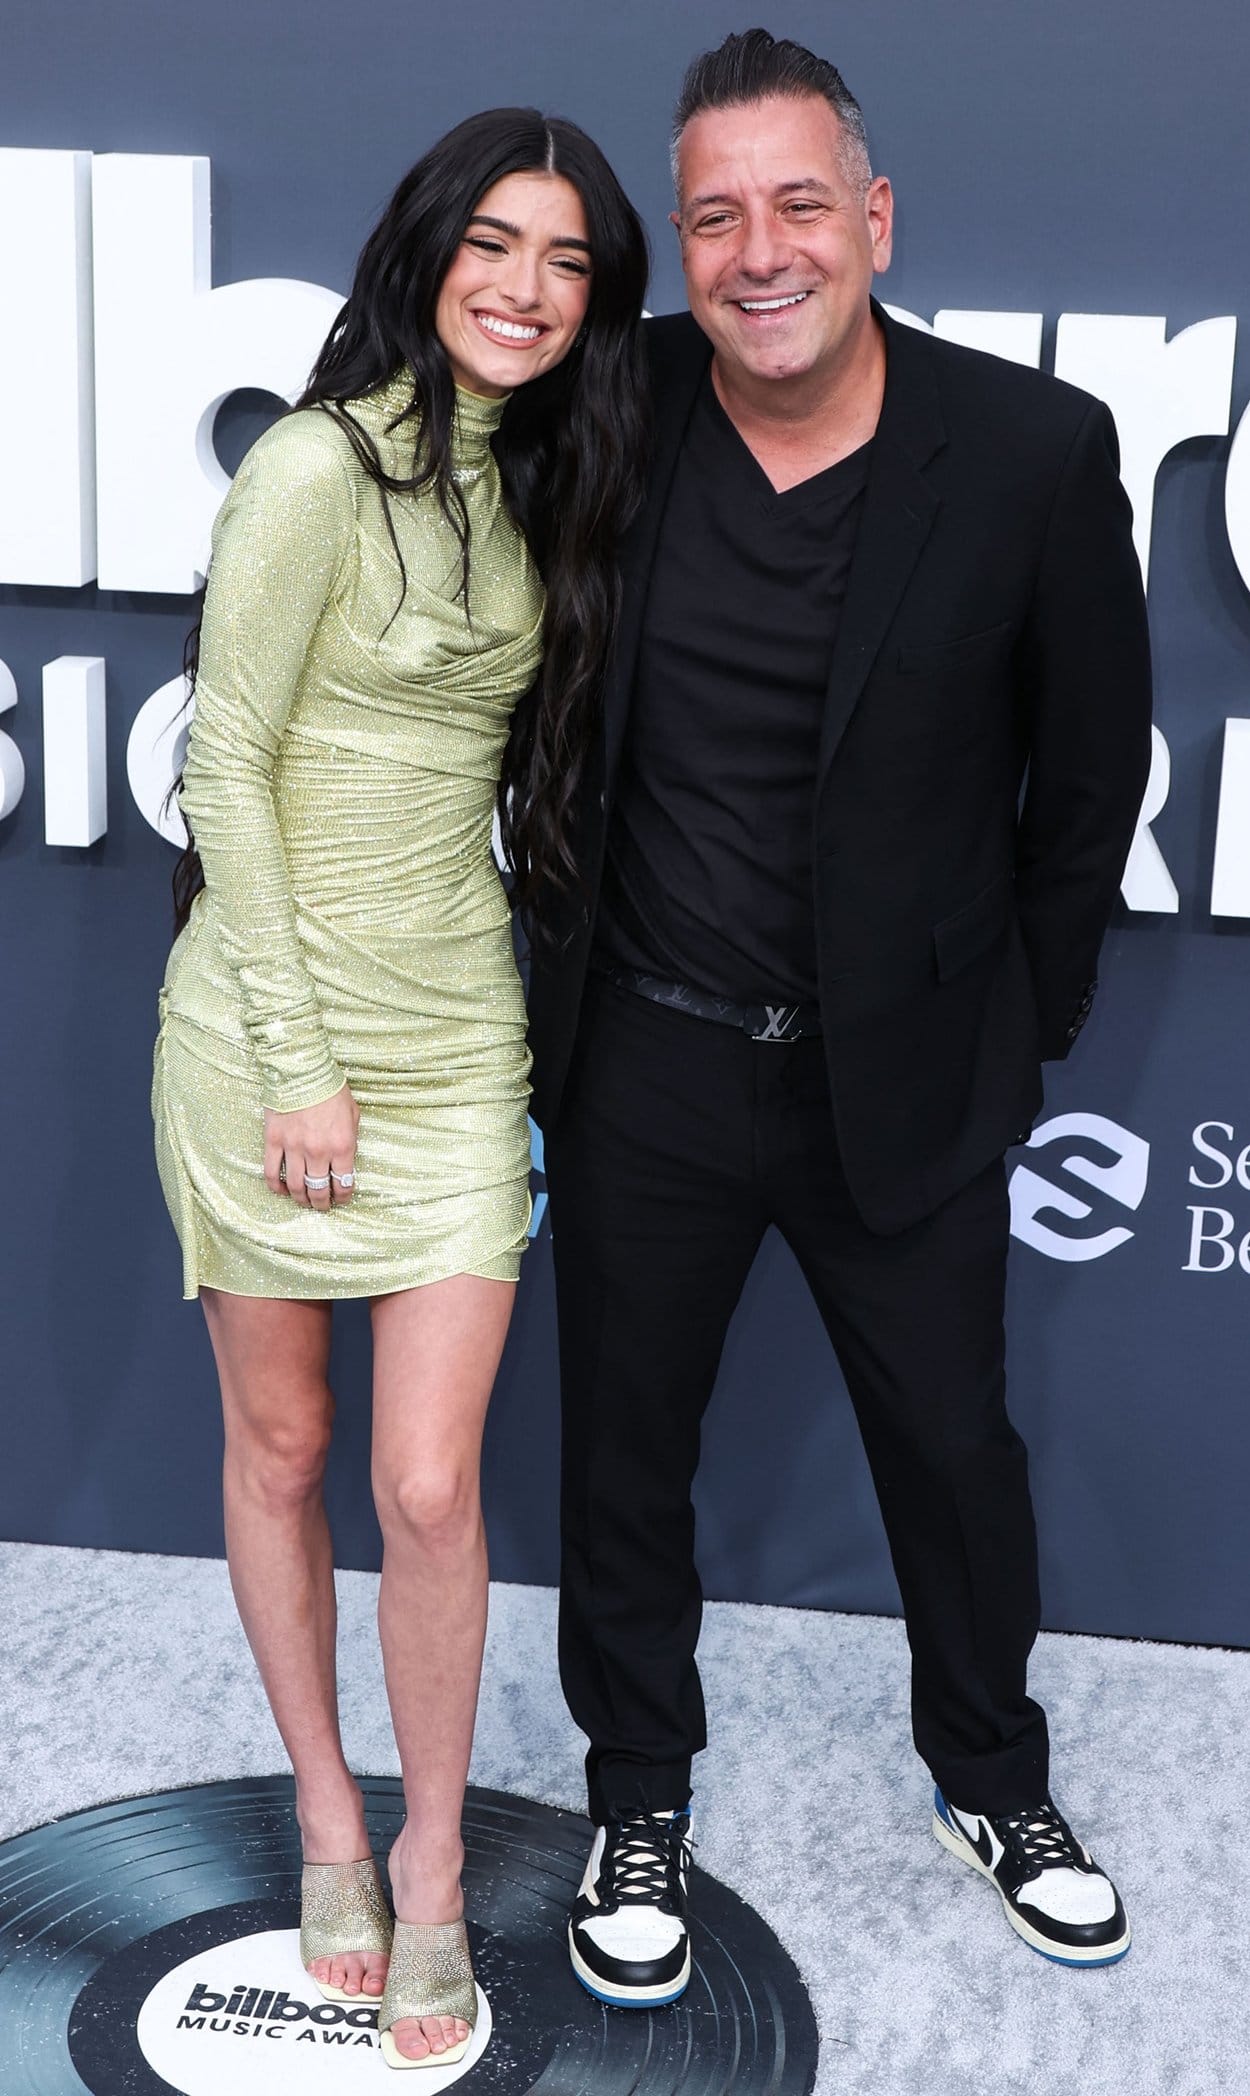 Dixie D'Amelio flaunts her legs in a lime green mini dress with her father Marc D'Amelio at the 2022 Billboard Music Awards